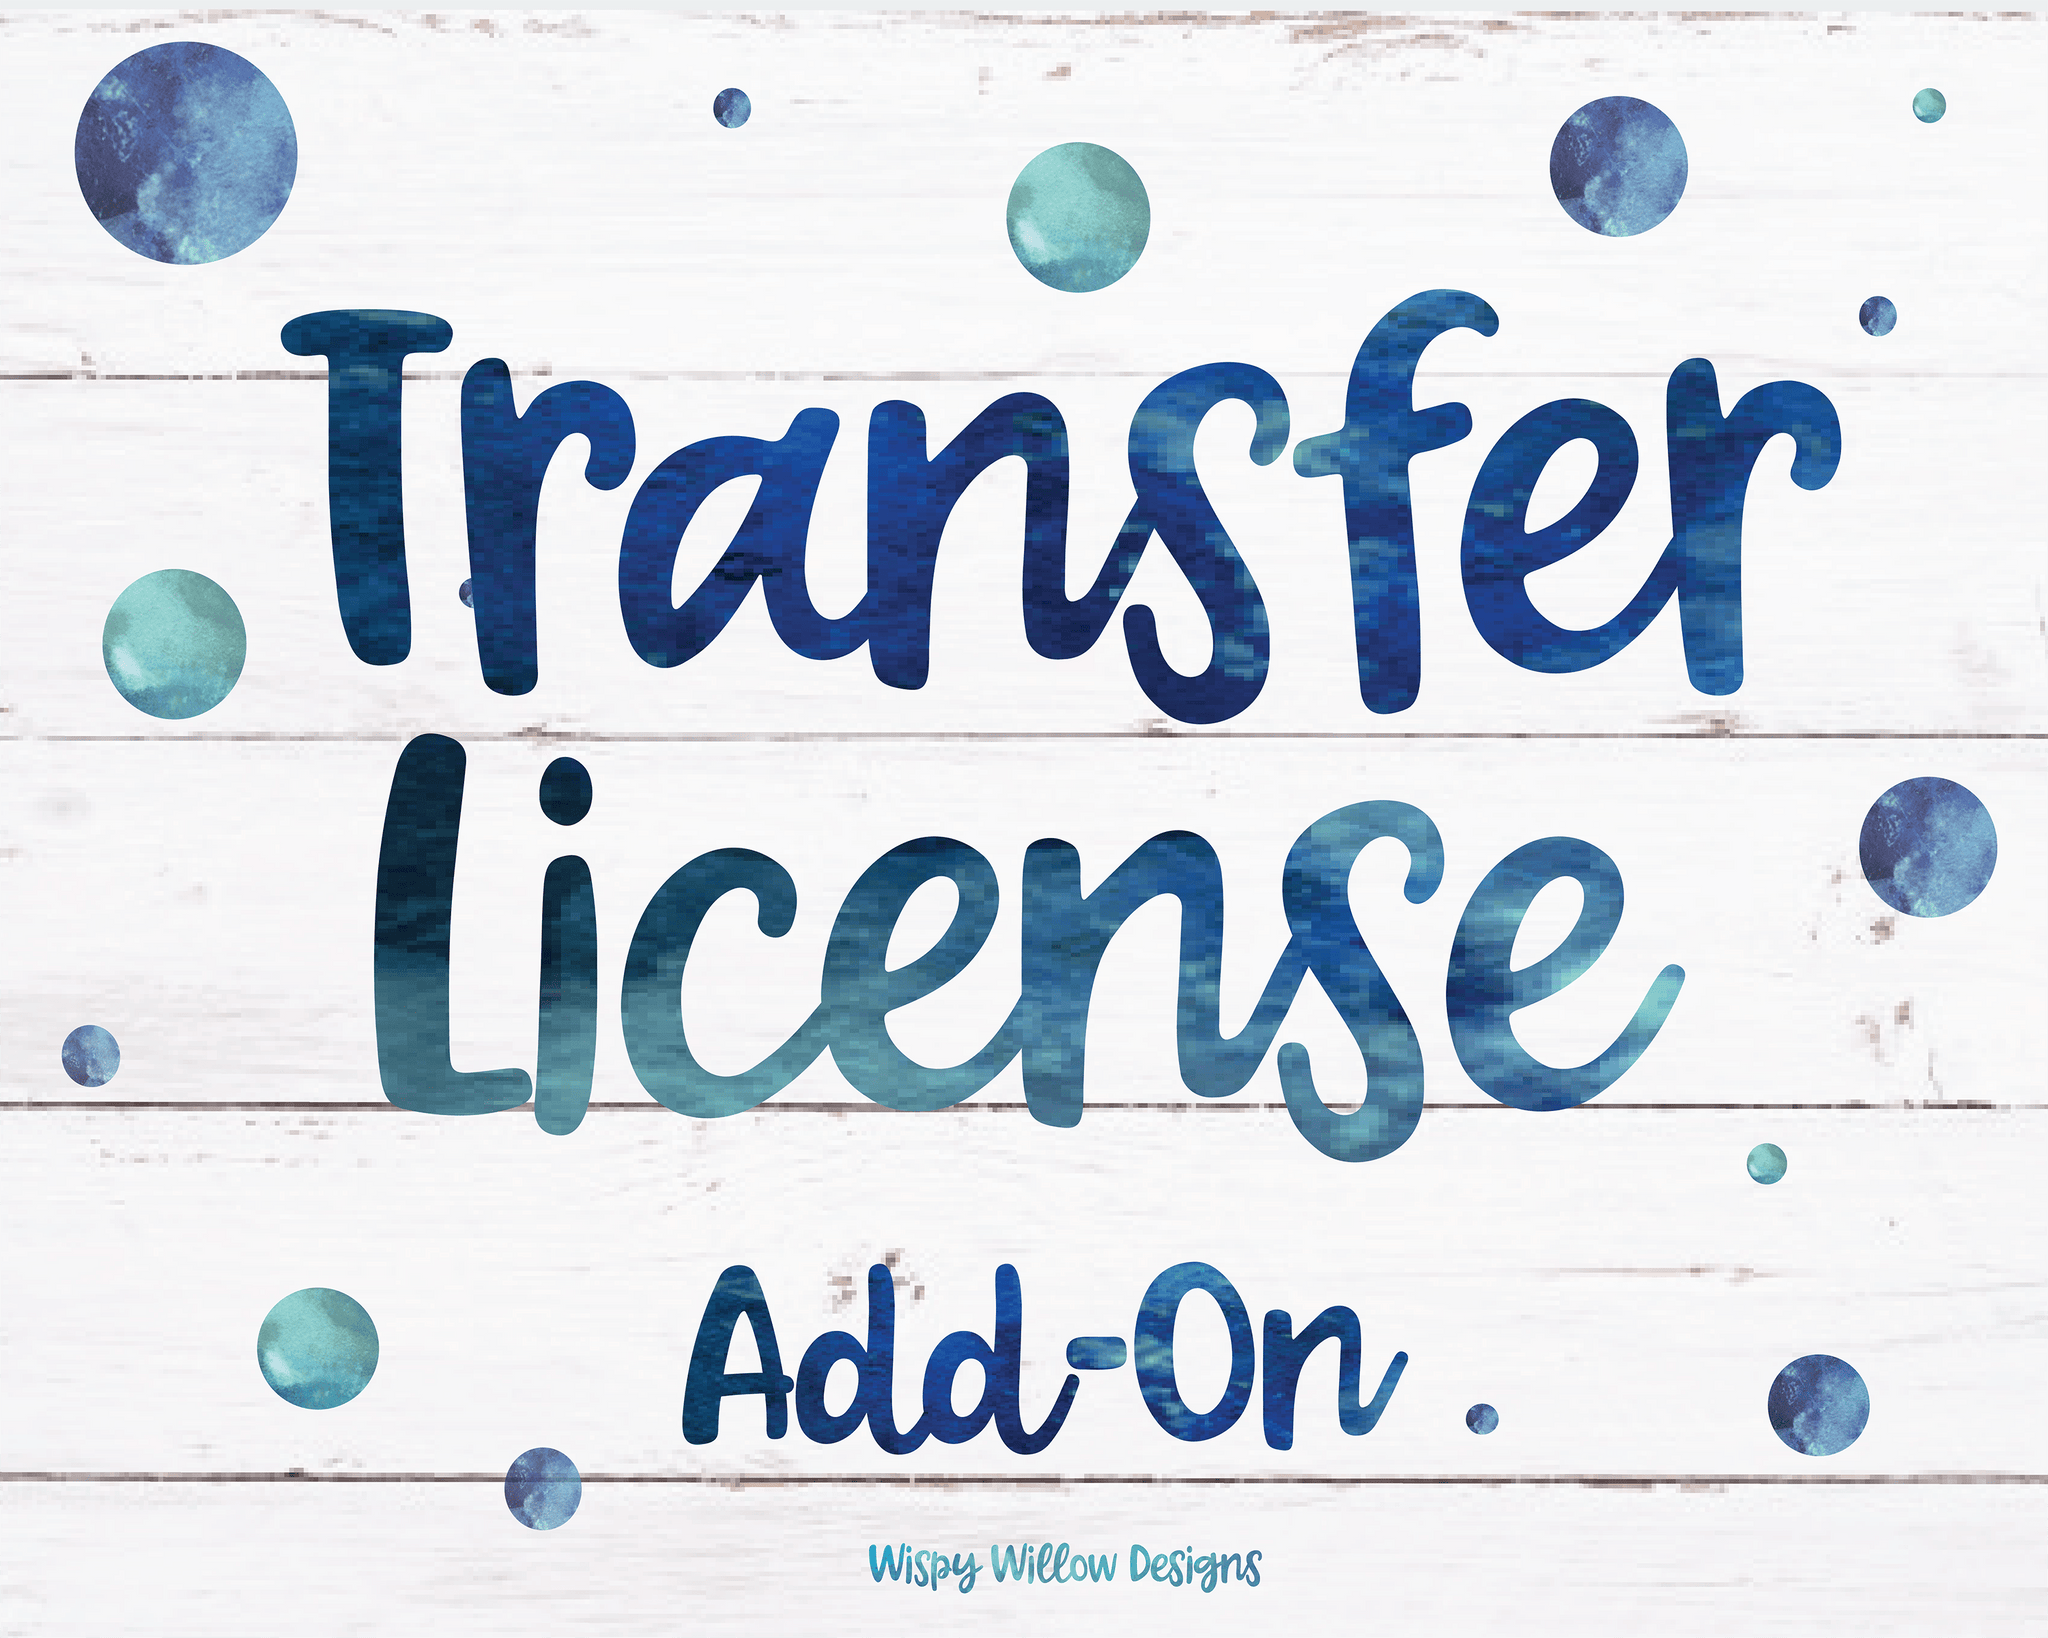 Transfer License Add On (One Graphic) Wispy Willow Designs Company